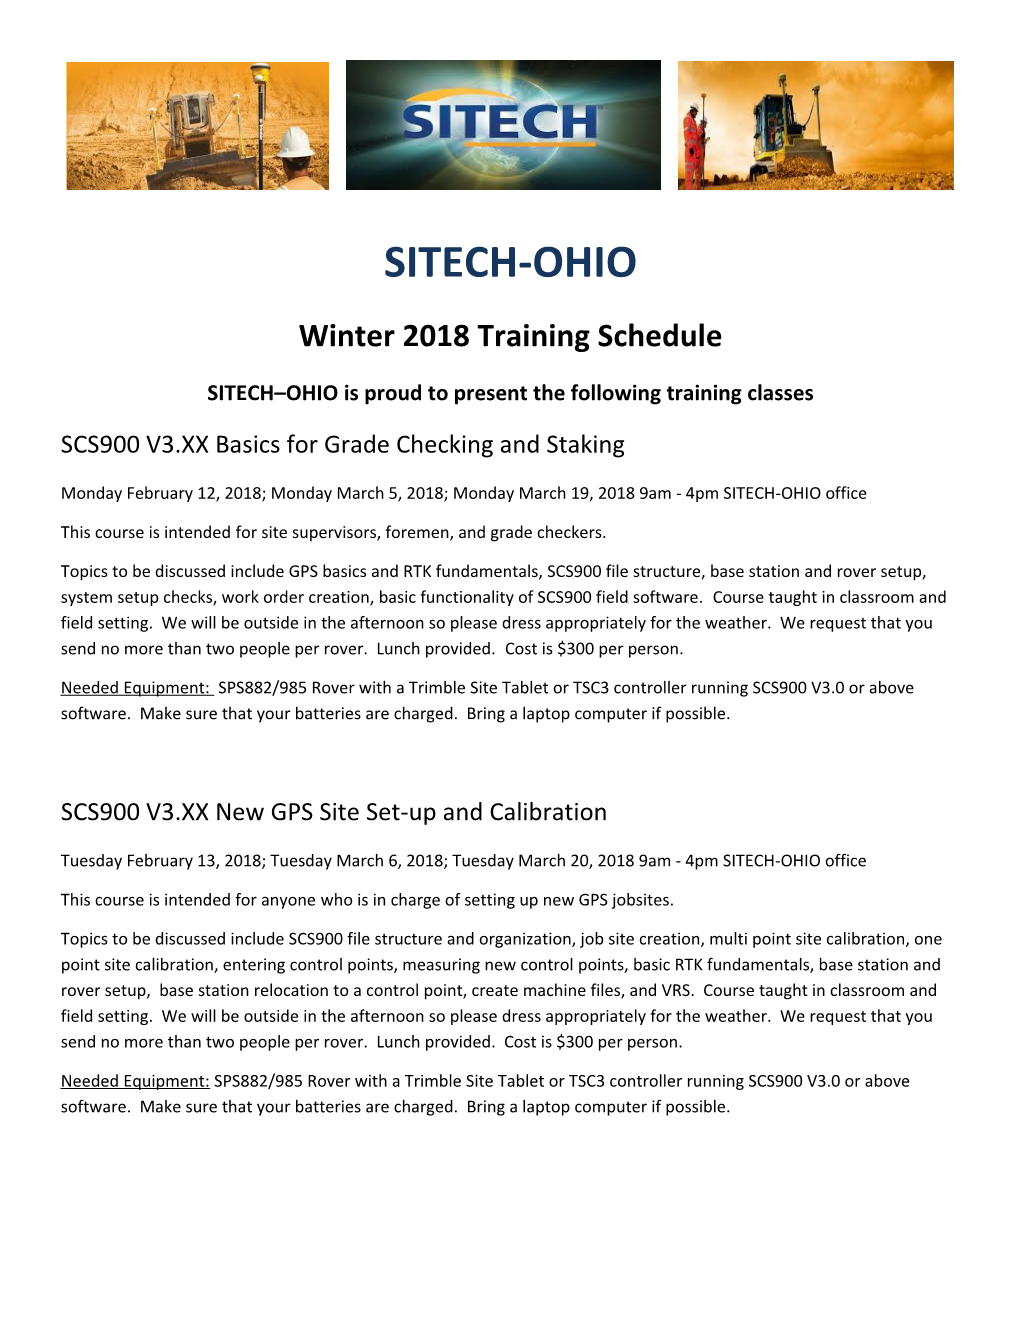 SITECH OHIO Is Proud to Present the Following Training Classes